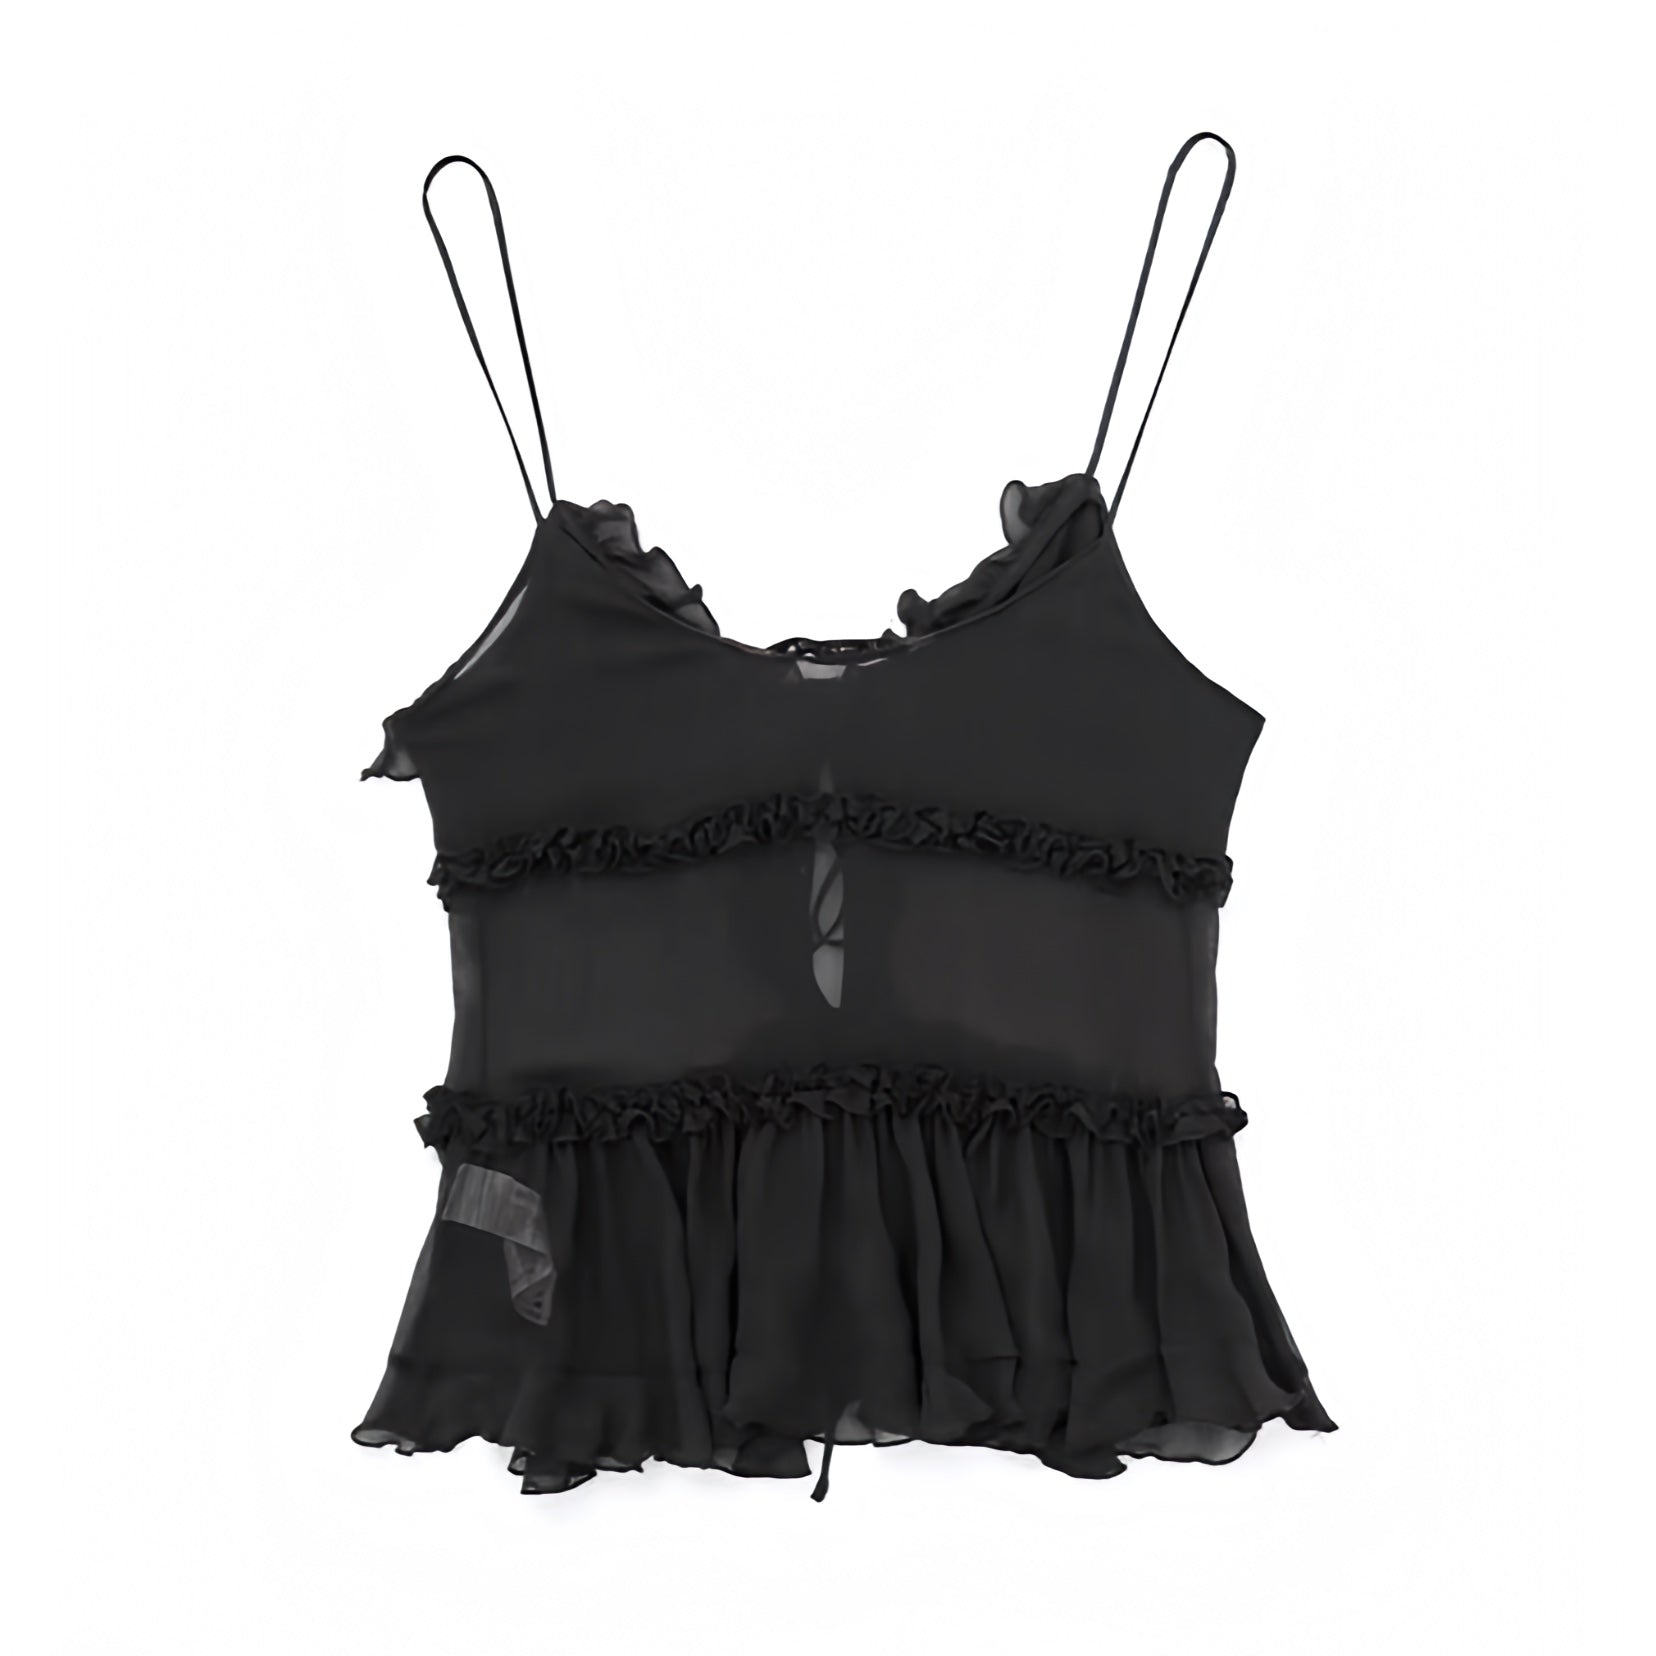 black-bow-layered-ruffle-trim-mesh-translucent-slim-fitted-bodice-round-neckline-spaghetti-strap-sleeveless-cut-out-backless-open-back-fit-and-flare-tiered-crop-camisole-tank-top-blouse-women-ladies-chic-trendy-spring-2024-summer-elegant-casual-feminine-coquette-goth-style-date-night-out-sexy-party-club-wear-shirt-zara-revolve-aritzia-urban-outfitters-whitefox-babyboo-iamgia-jaded-london-areyouami-edikted